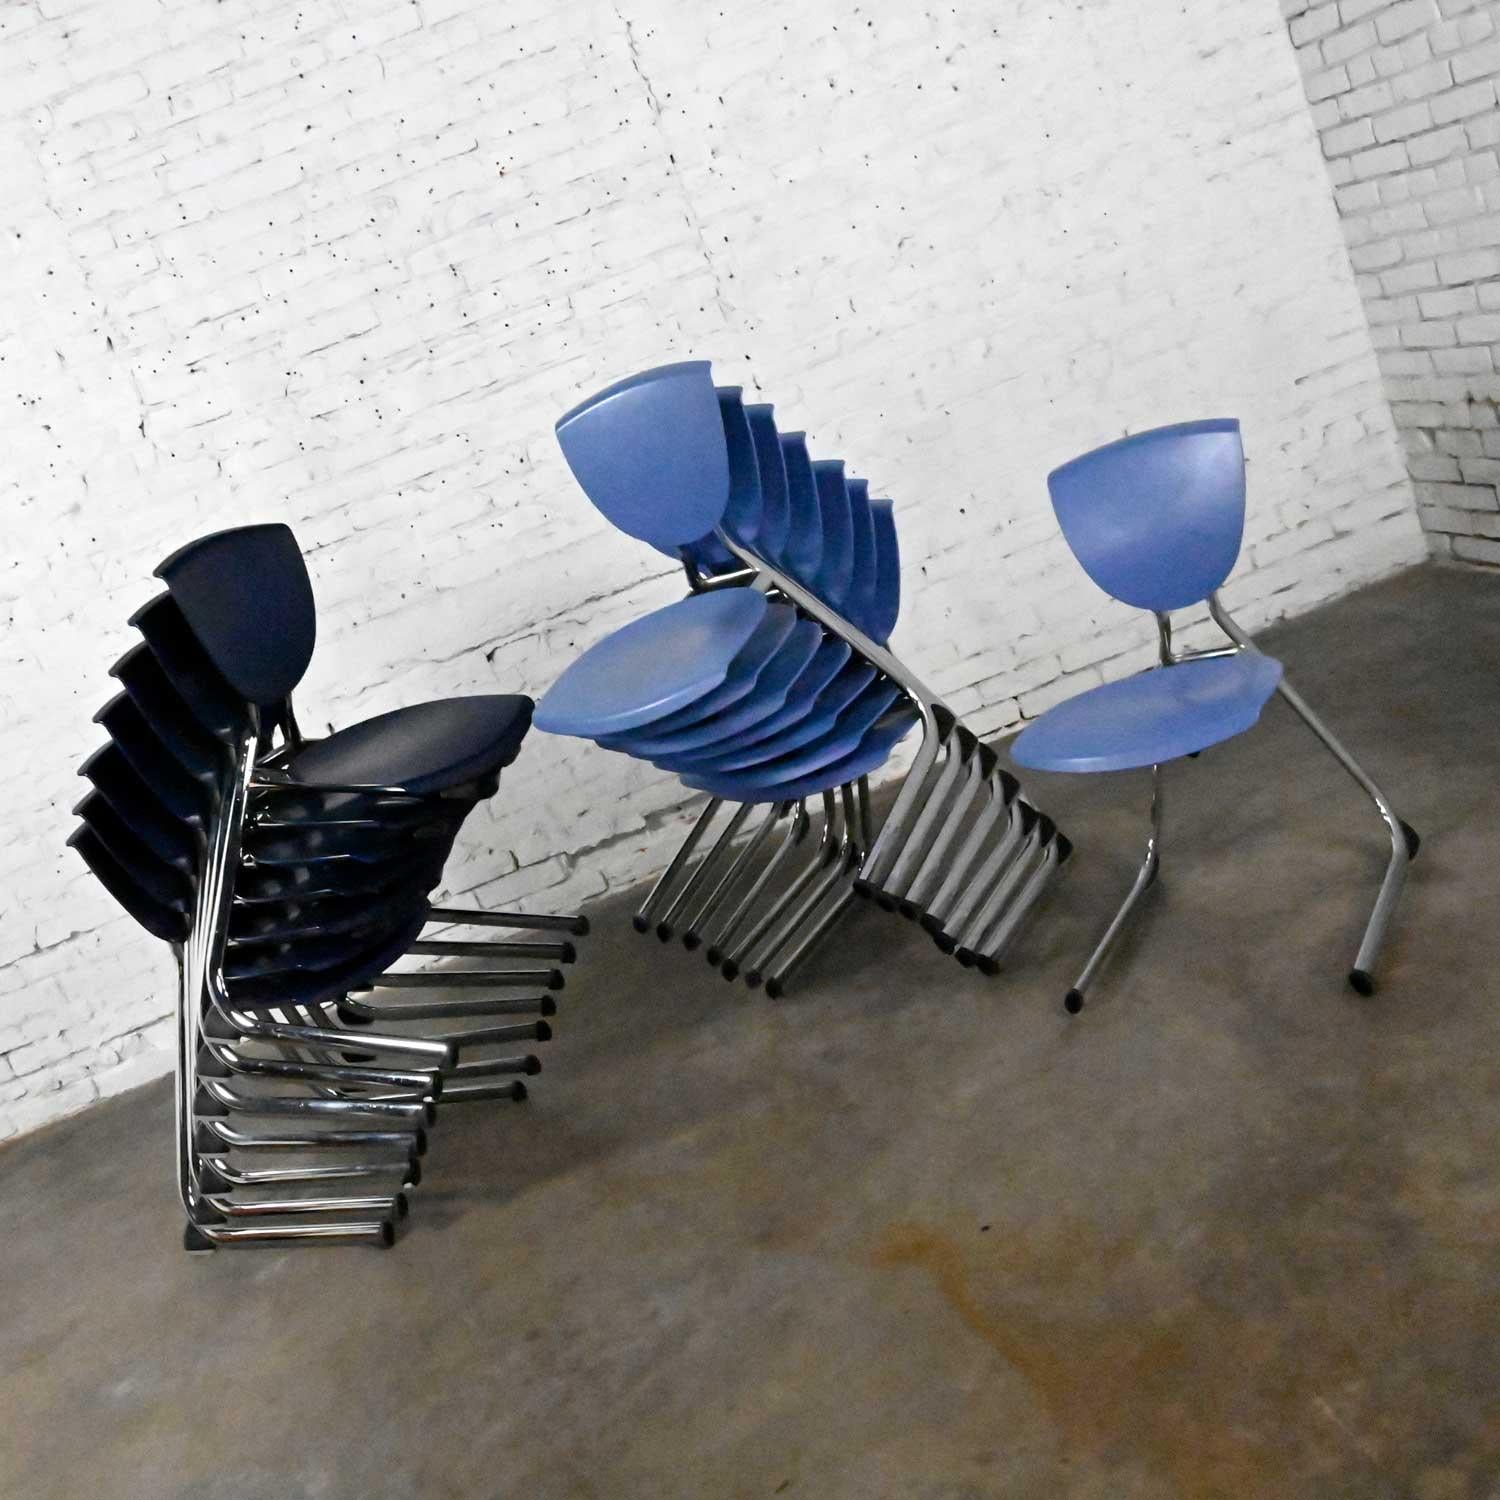 Fantastic vintage modern dark blue plastic & chrome reverse cantilever Intellect dining chairs by Krueger International (a.k.a.) KI Seating 15 total. Beautiful condition, keeping in mind that these are vintage and not new so will have signs of use